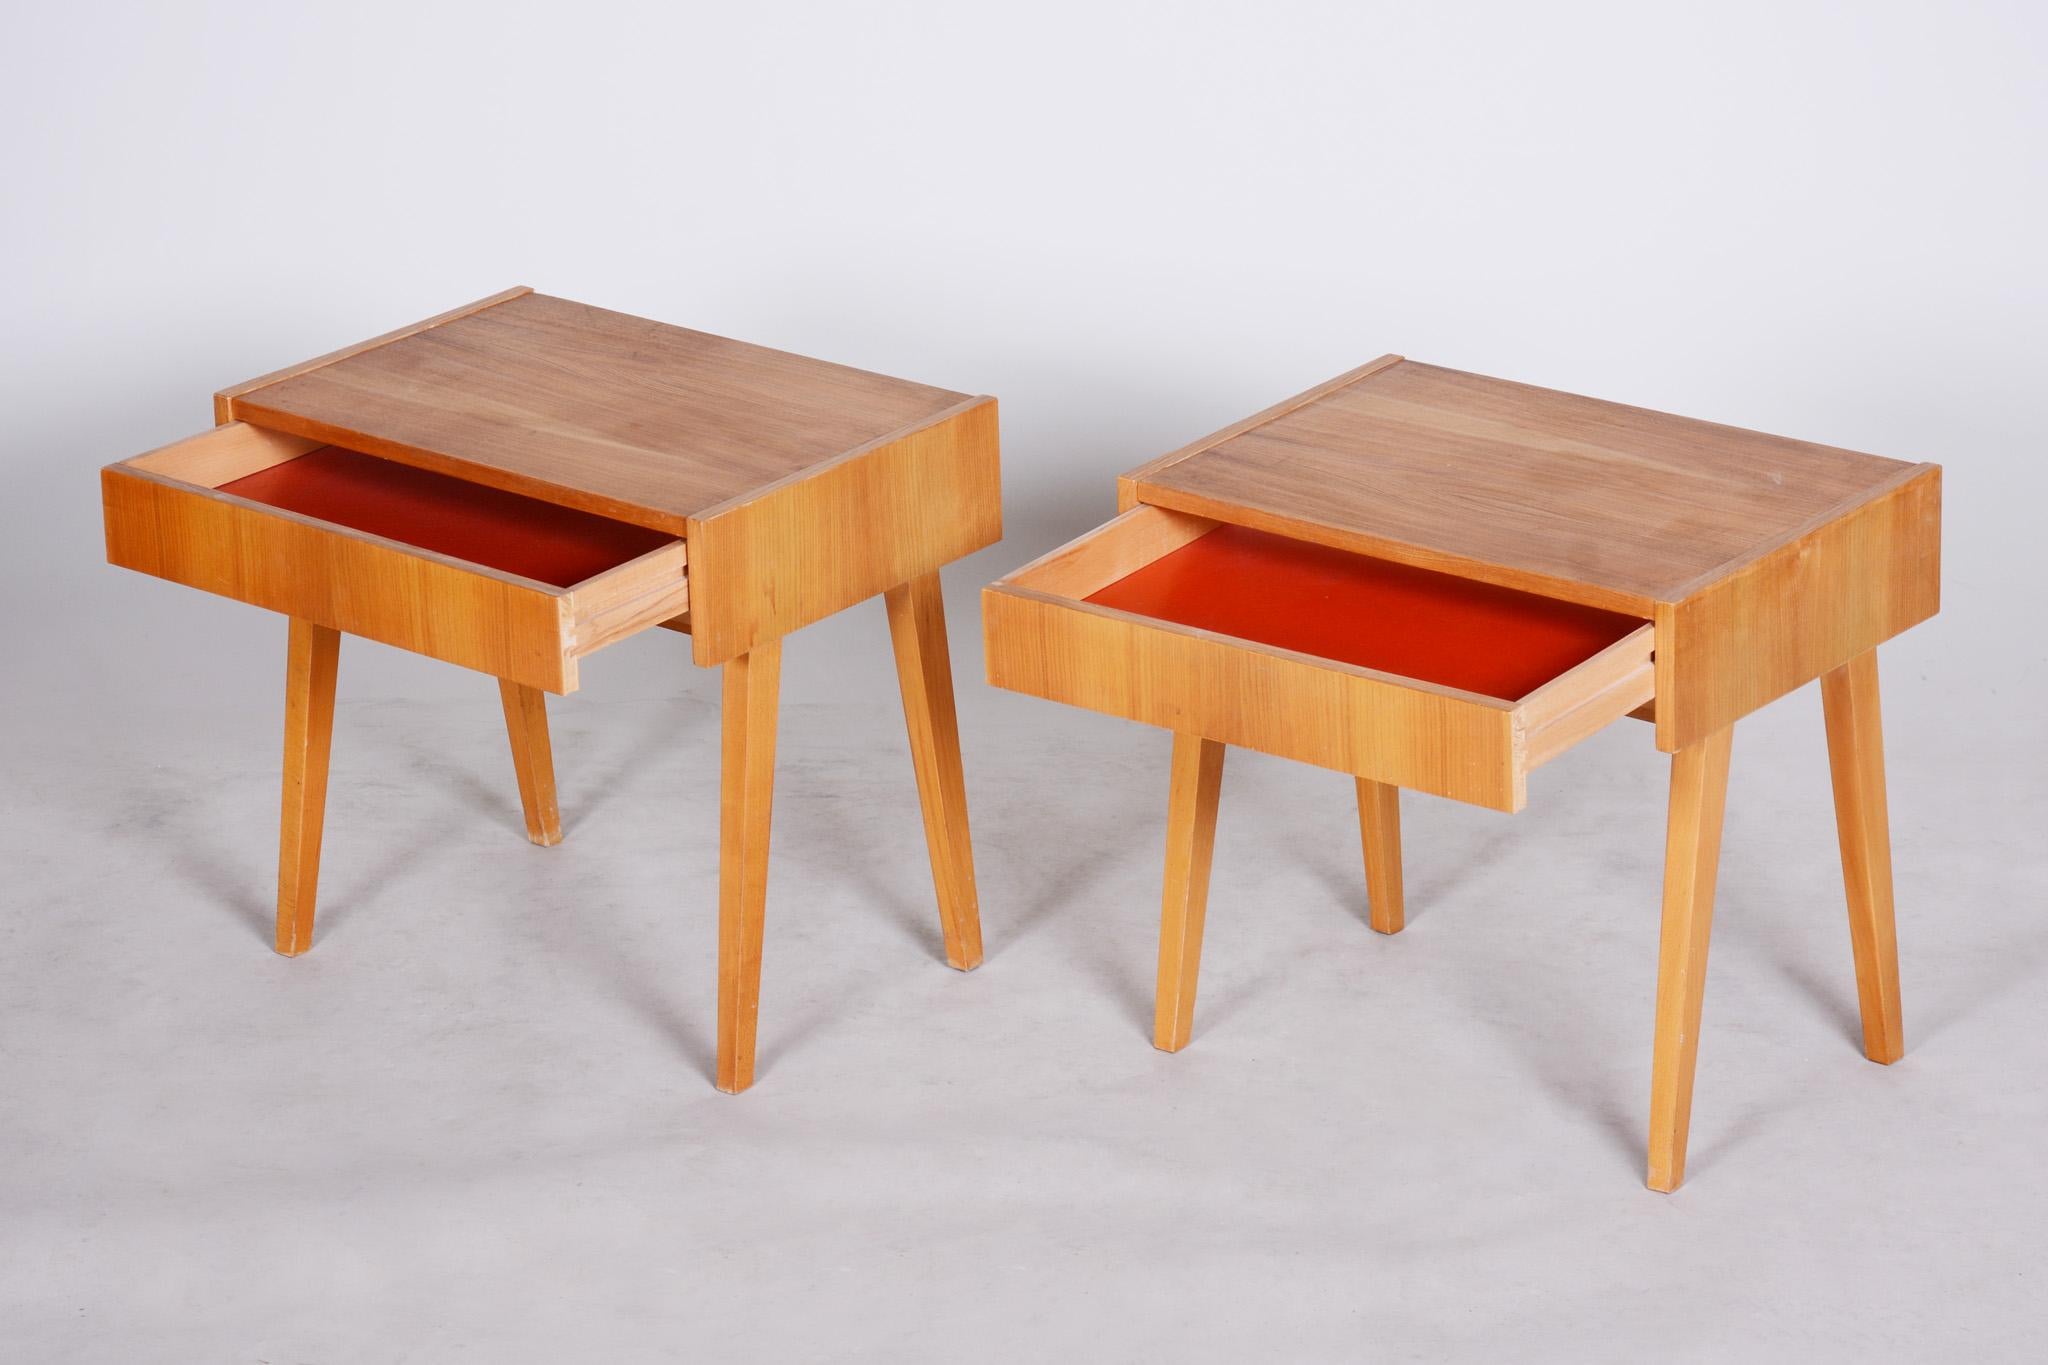 Pair of Ash Brown Midcentury Modeern Bedside Tables Made in Czechia, 1950s 1